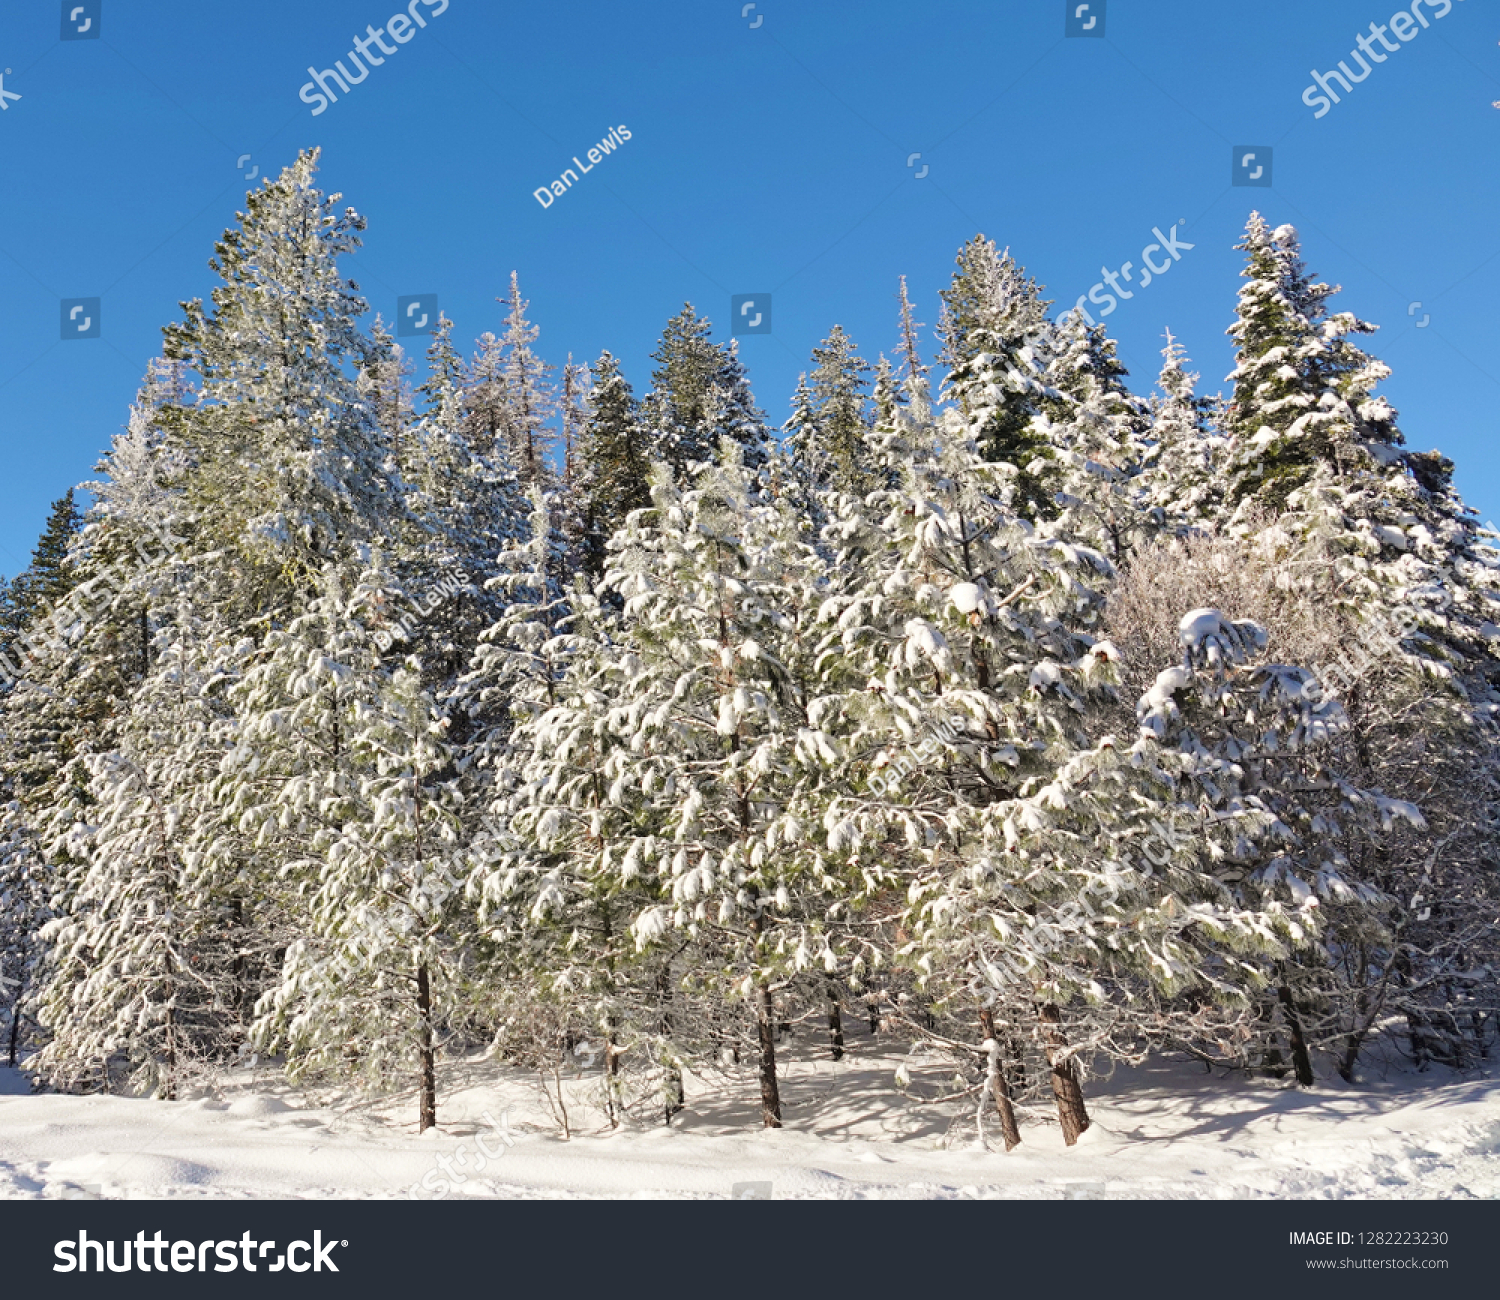 Winter wonderland scene in a WA national forest in Cascade Mountains. Sky cleared after freshly fallen snow that covers ground & isolated, stunning group of evergreen trees that fill most of frame. #1282223230